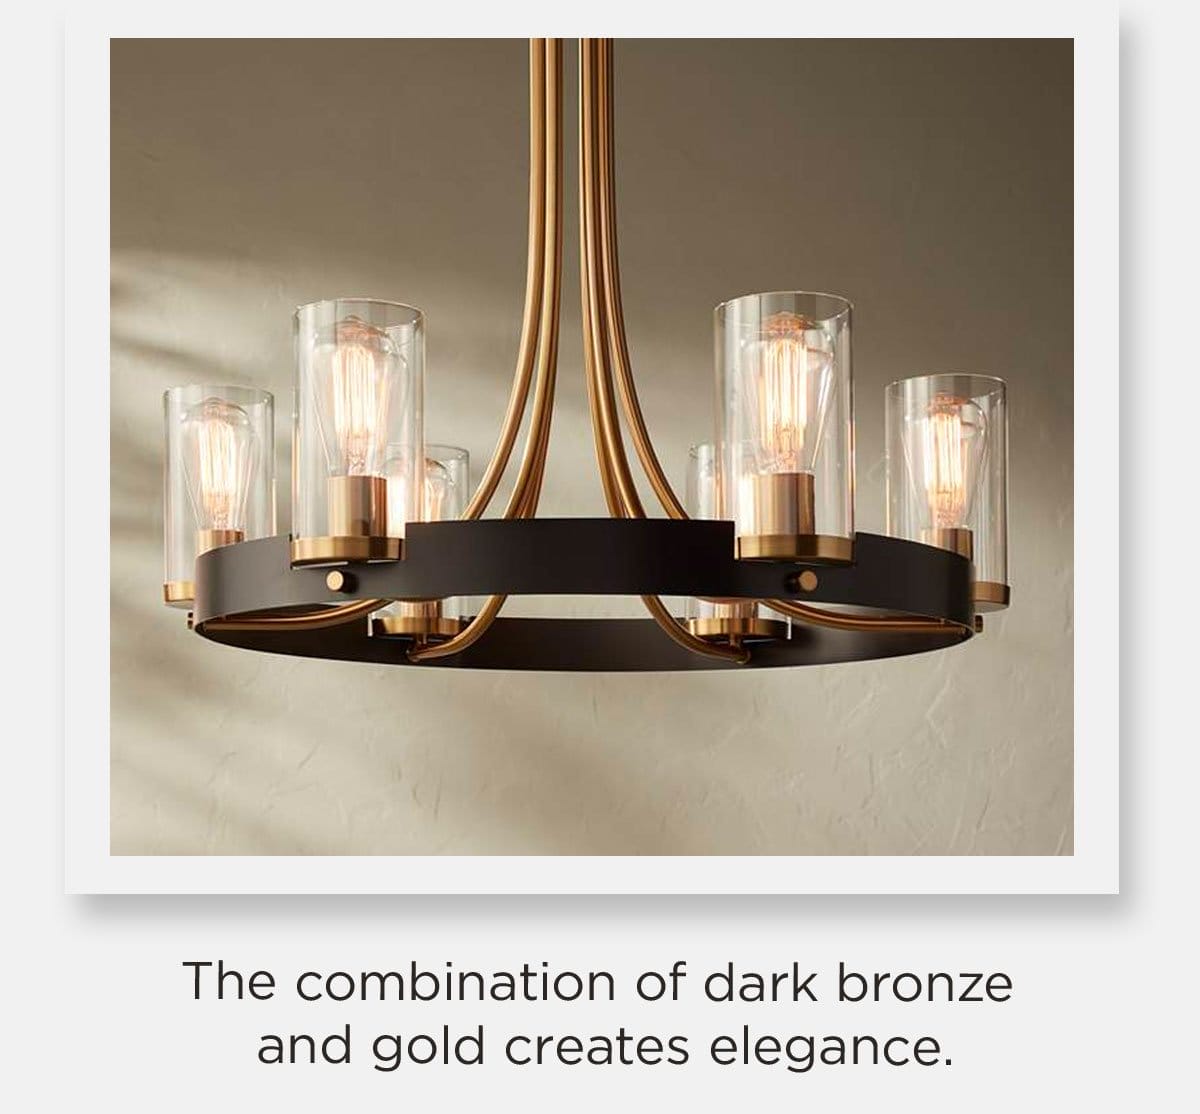 The combination of dark bronze and gold creates elegance.